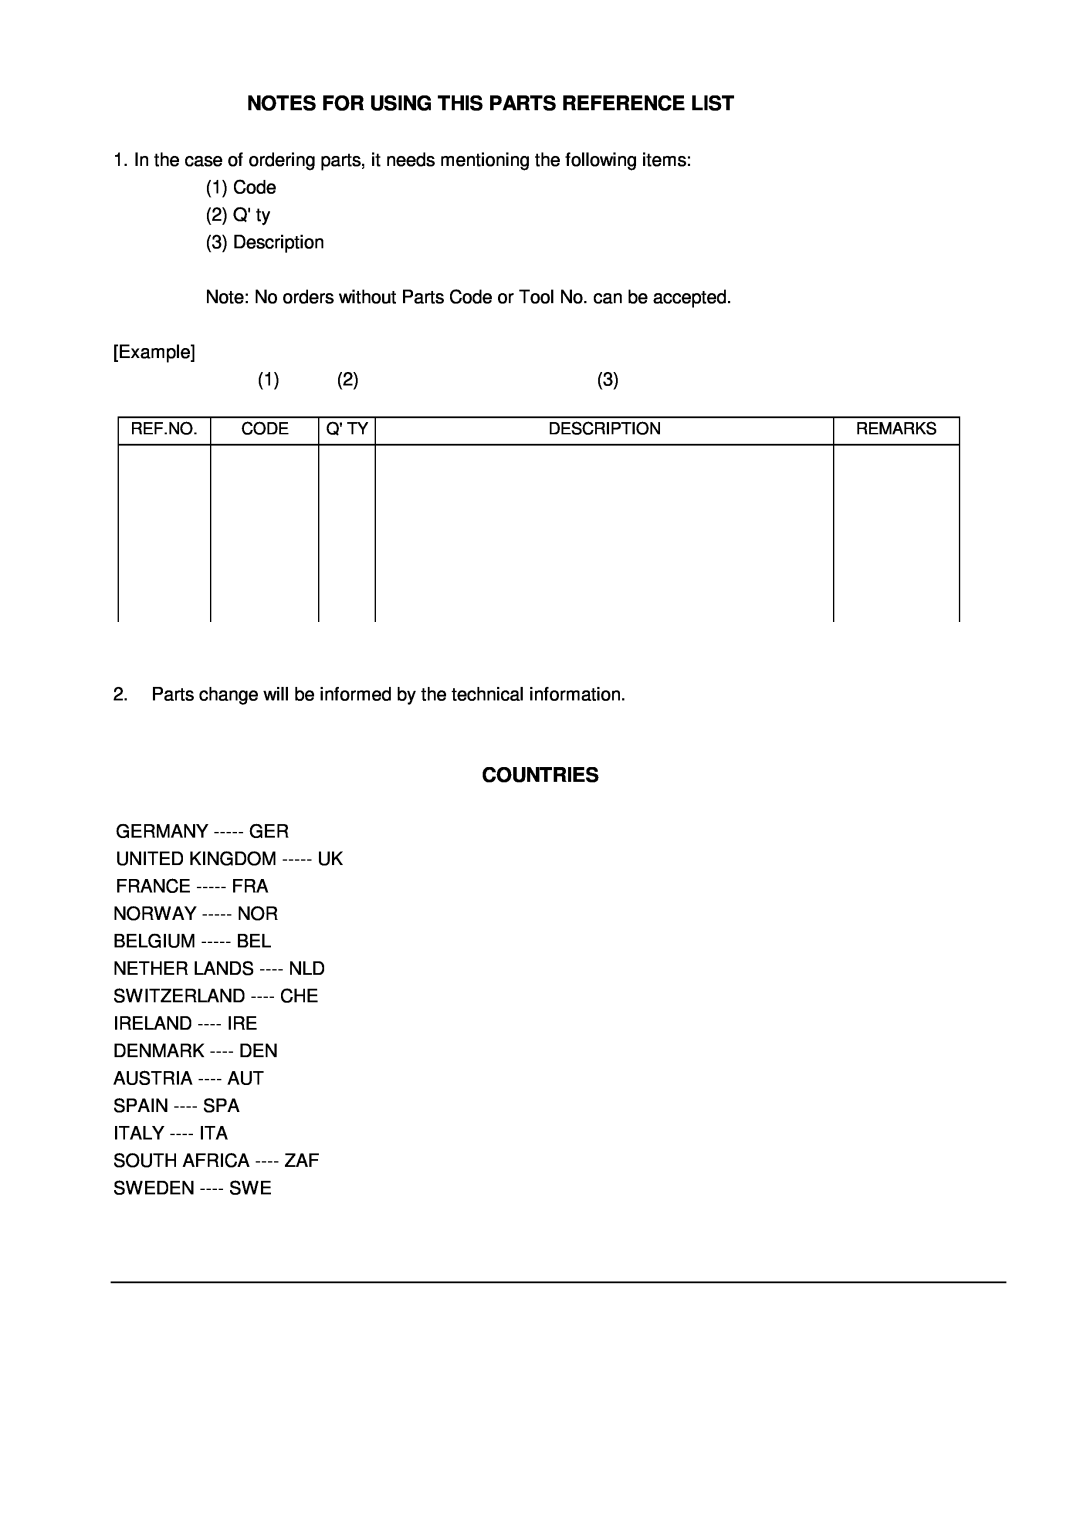 Brother MFC-830, MFC-840 manual Notes For Using This Parts Reference List, Countries 